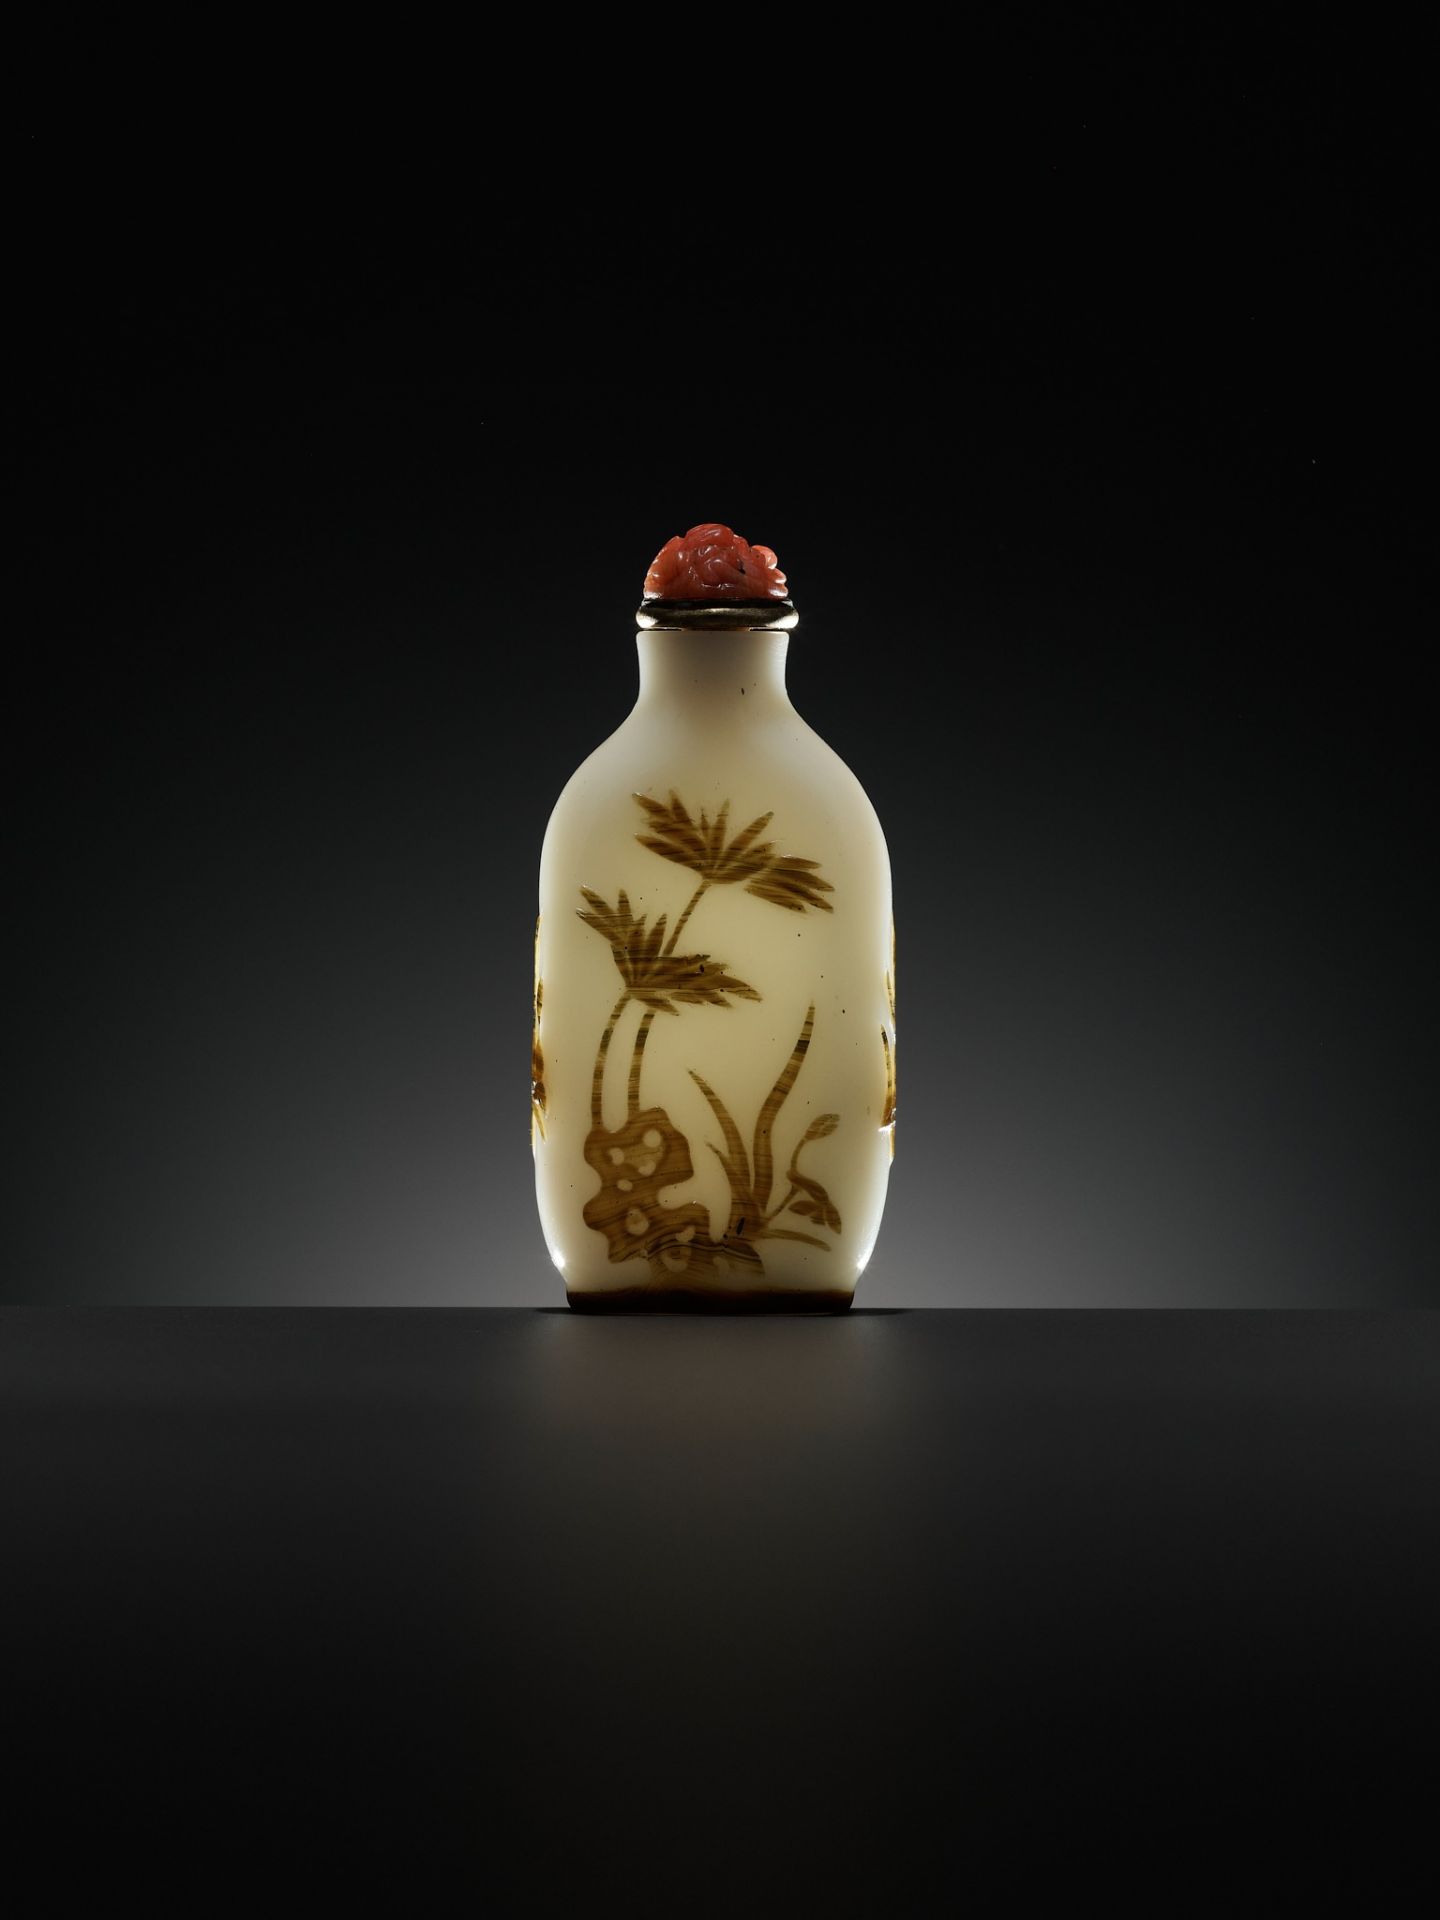 AN INSCRIBED OVERLAY GLASS ‘CAT AND BUTTERFLY’ SNUFF BOTTLE, BY WANG SU, YANGZHOU SCHOOL, 1820-1840 - Image 6 of 19